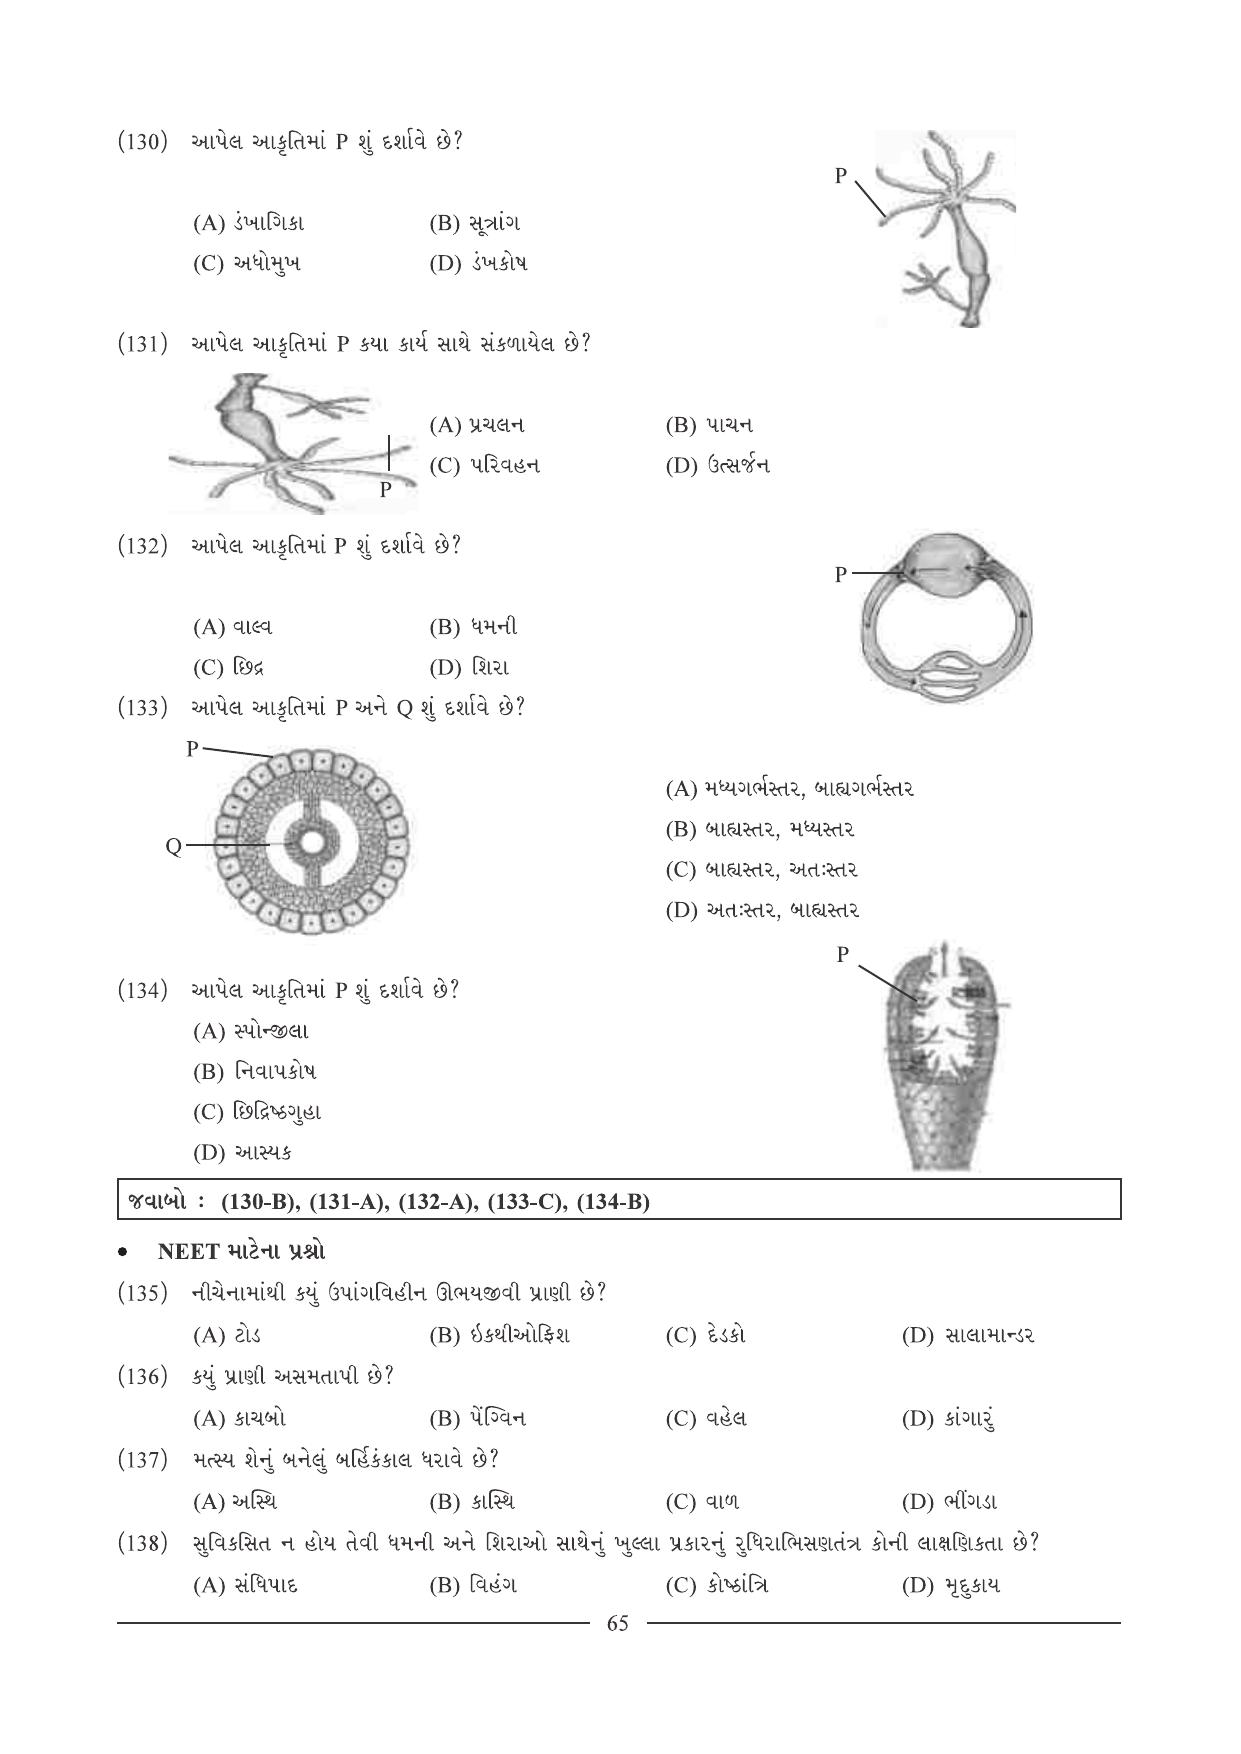 GSEB HSC Biology Question Paper (Gujarati Medium)- Chapter 4 - Page 18